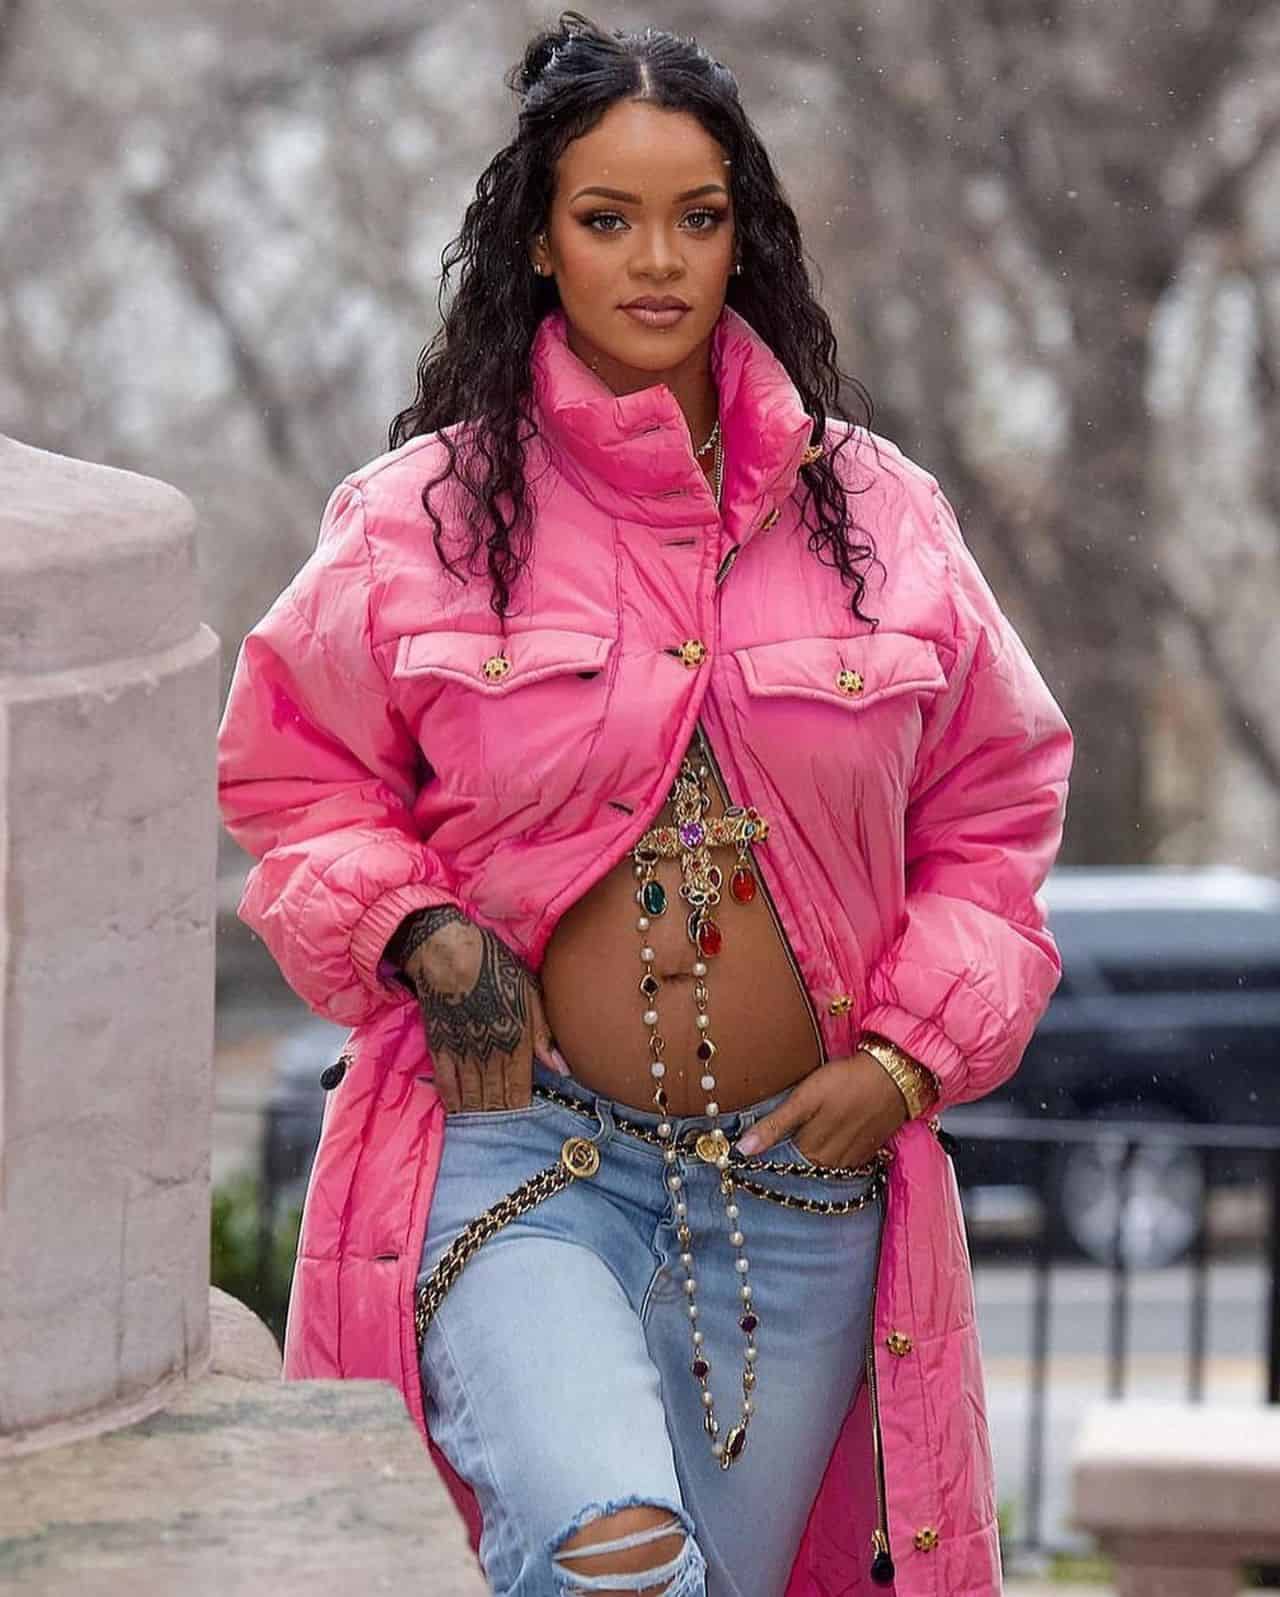 Rihanna is Going to be a Mom and Just Showed Off her Growing Belly